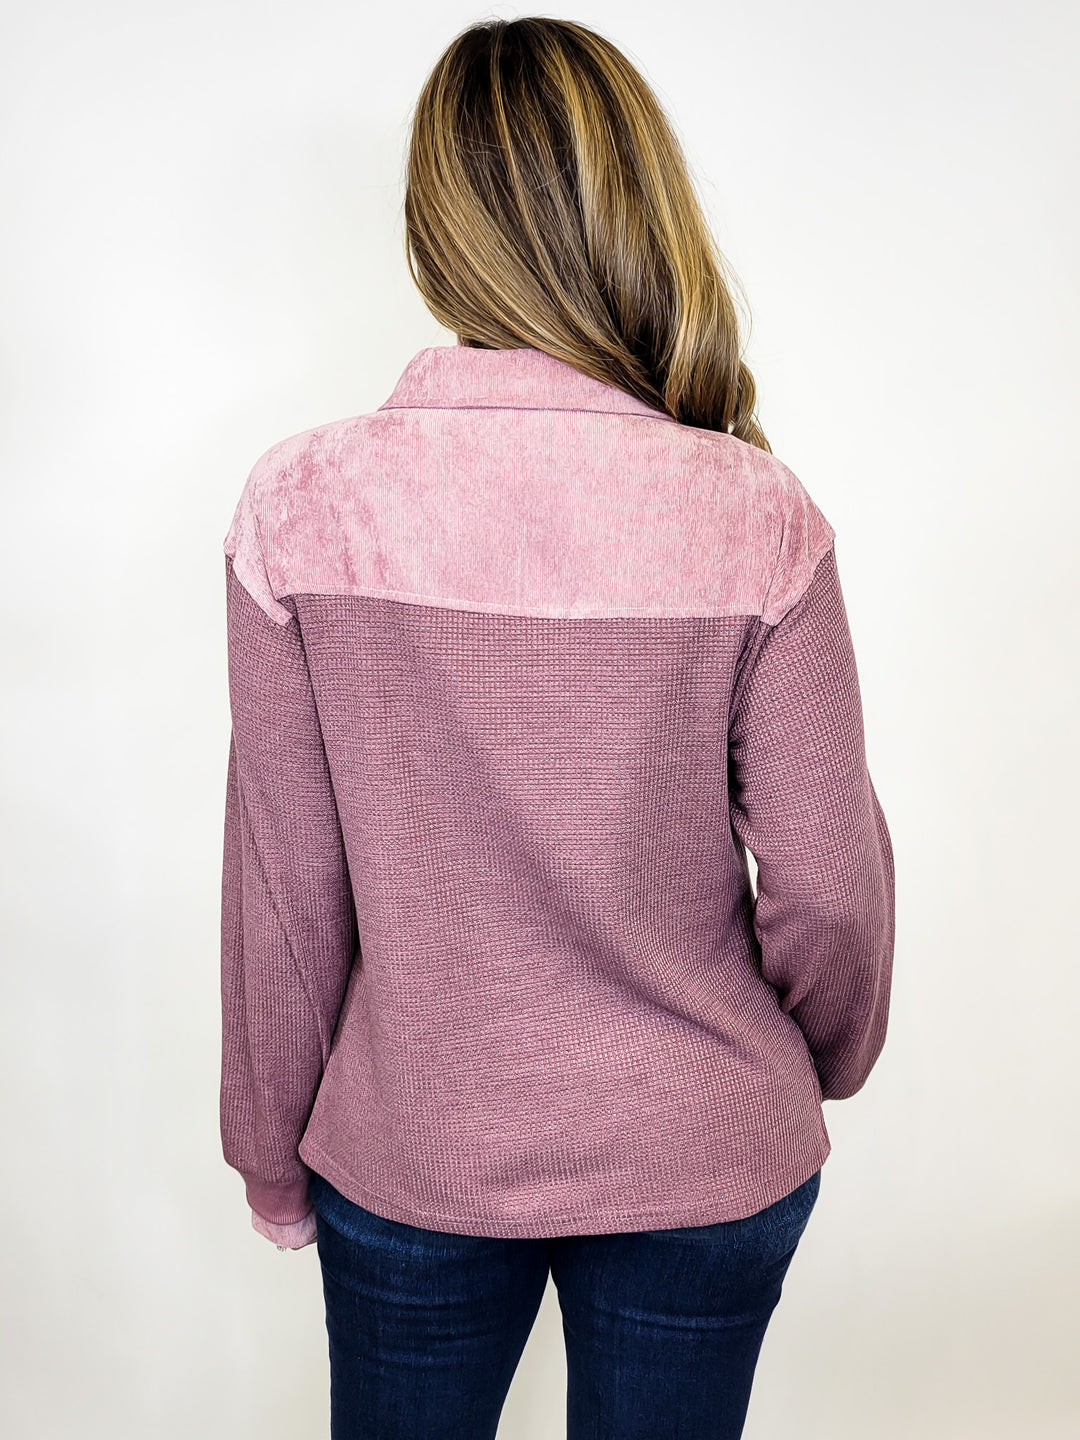 THERMAL KNIT POLO PULLOVER TOP - MAUVE